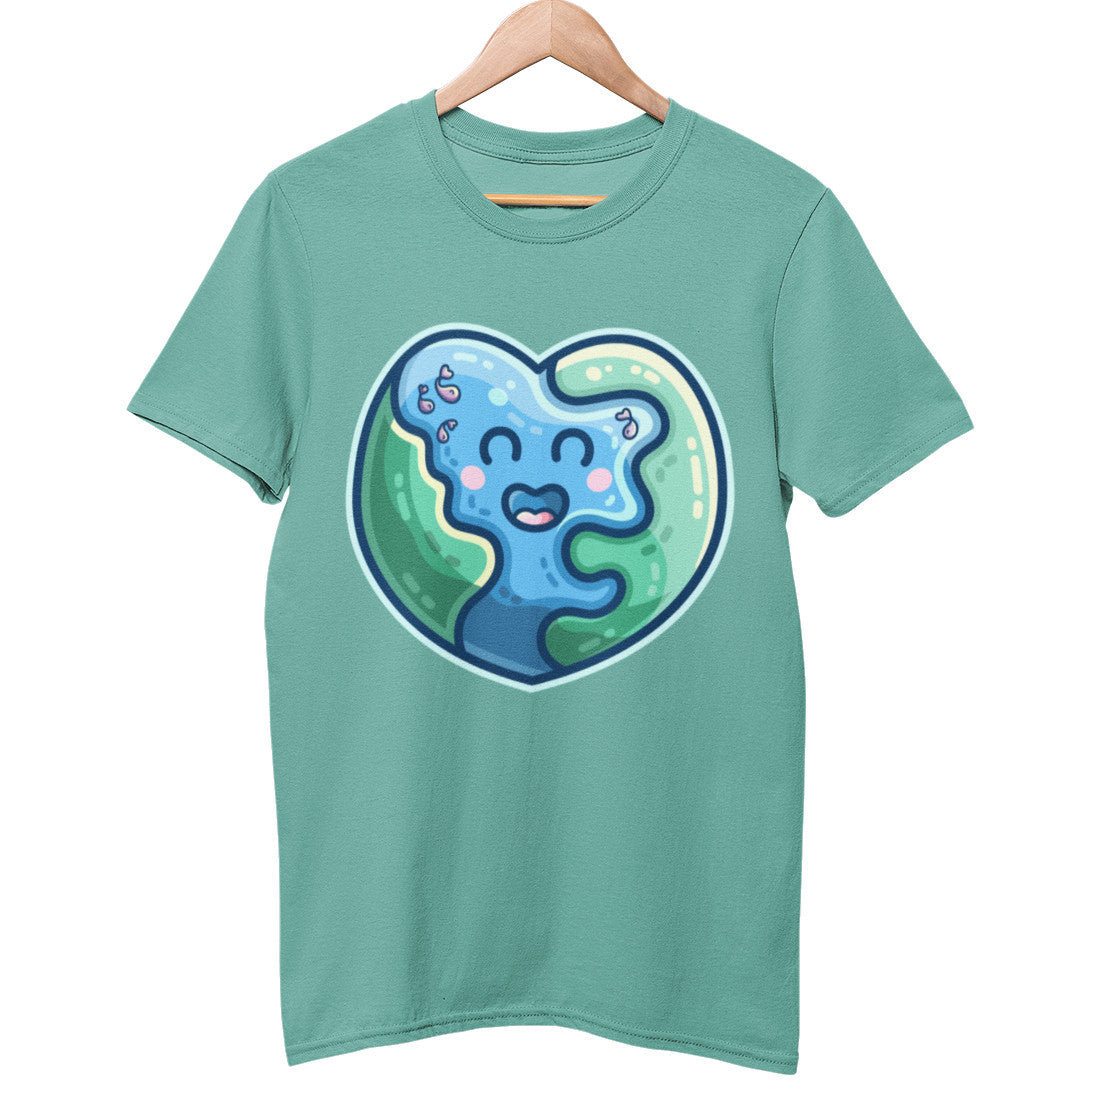 A green bay coloured unisex crewneck t-shirt on a hanger with a design on its chest of a kawaii cute blue and green heart shaped Earth like planet, with a few fish in the oceans